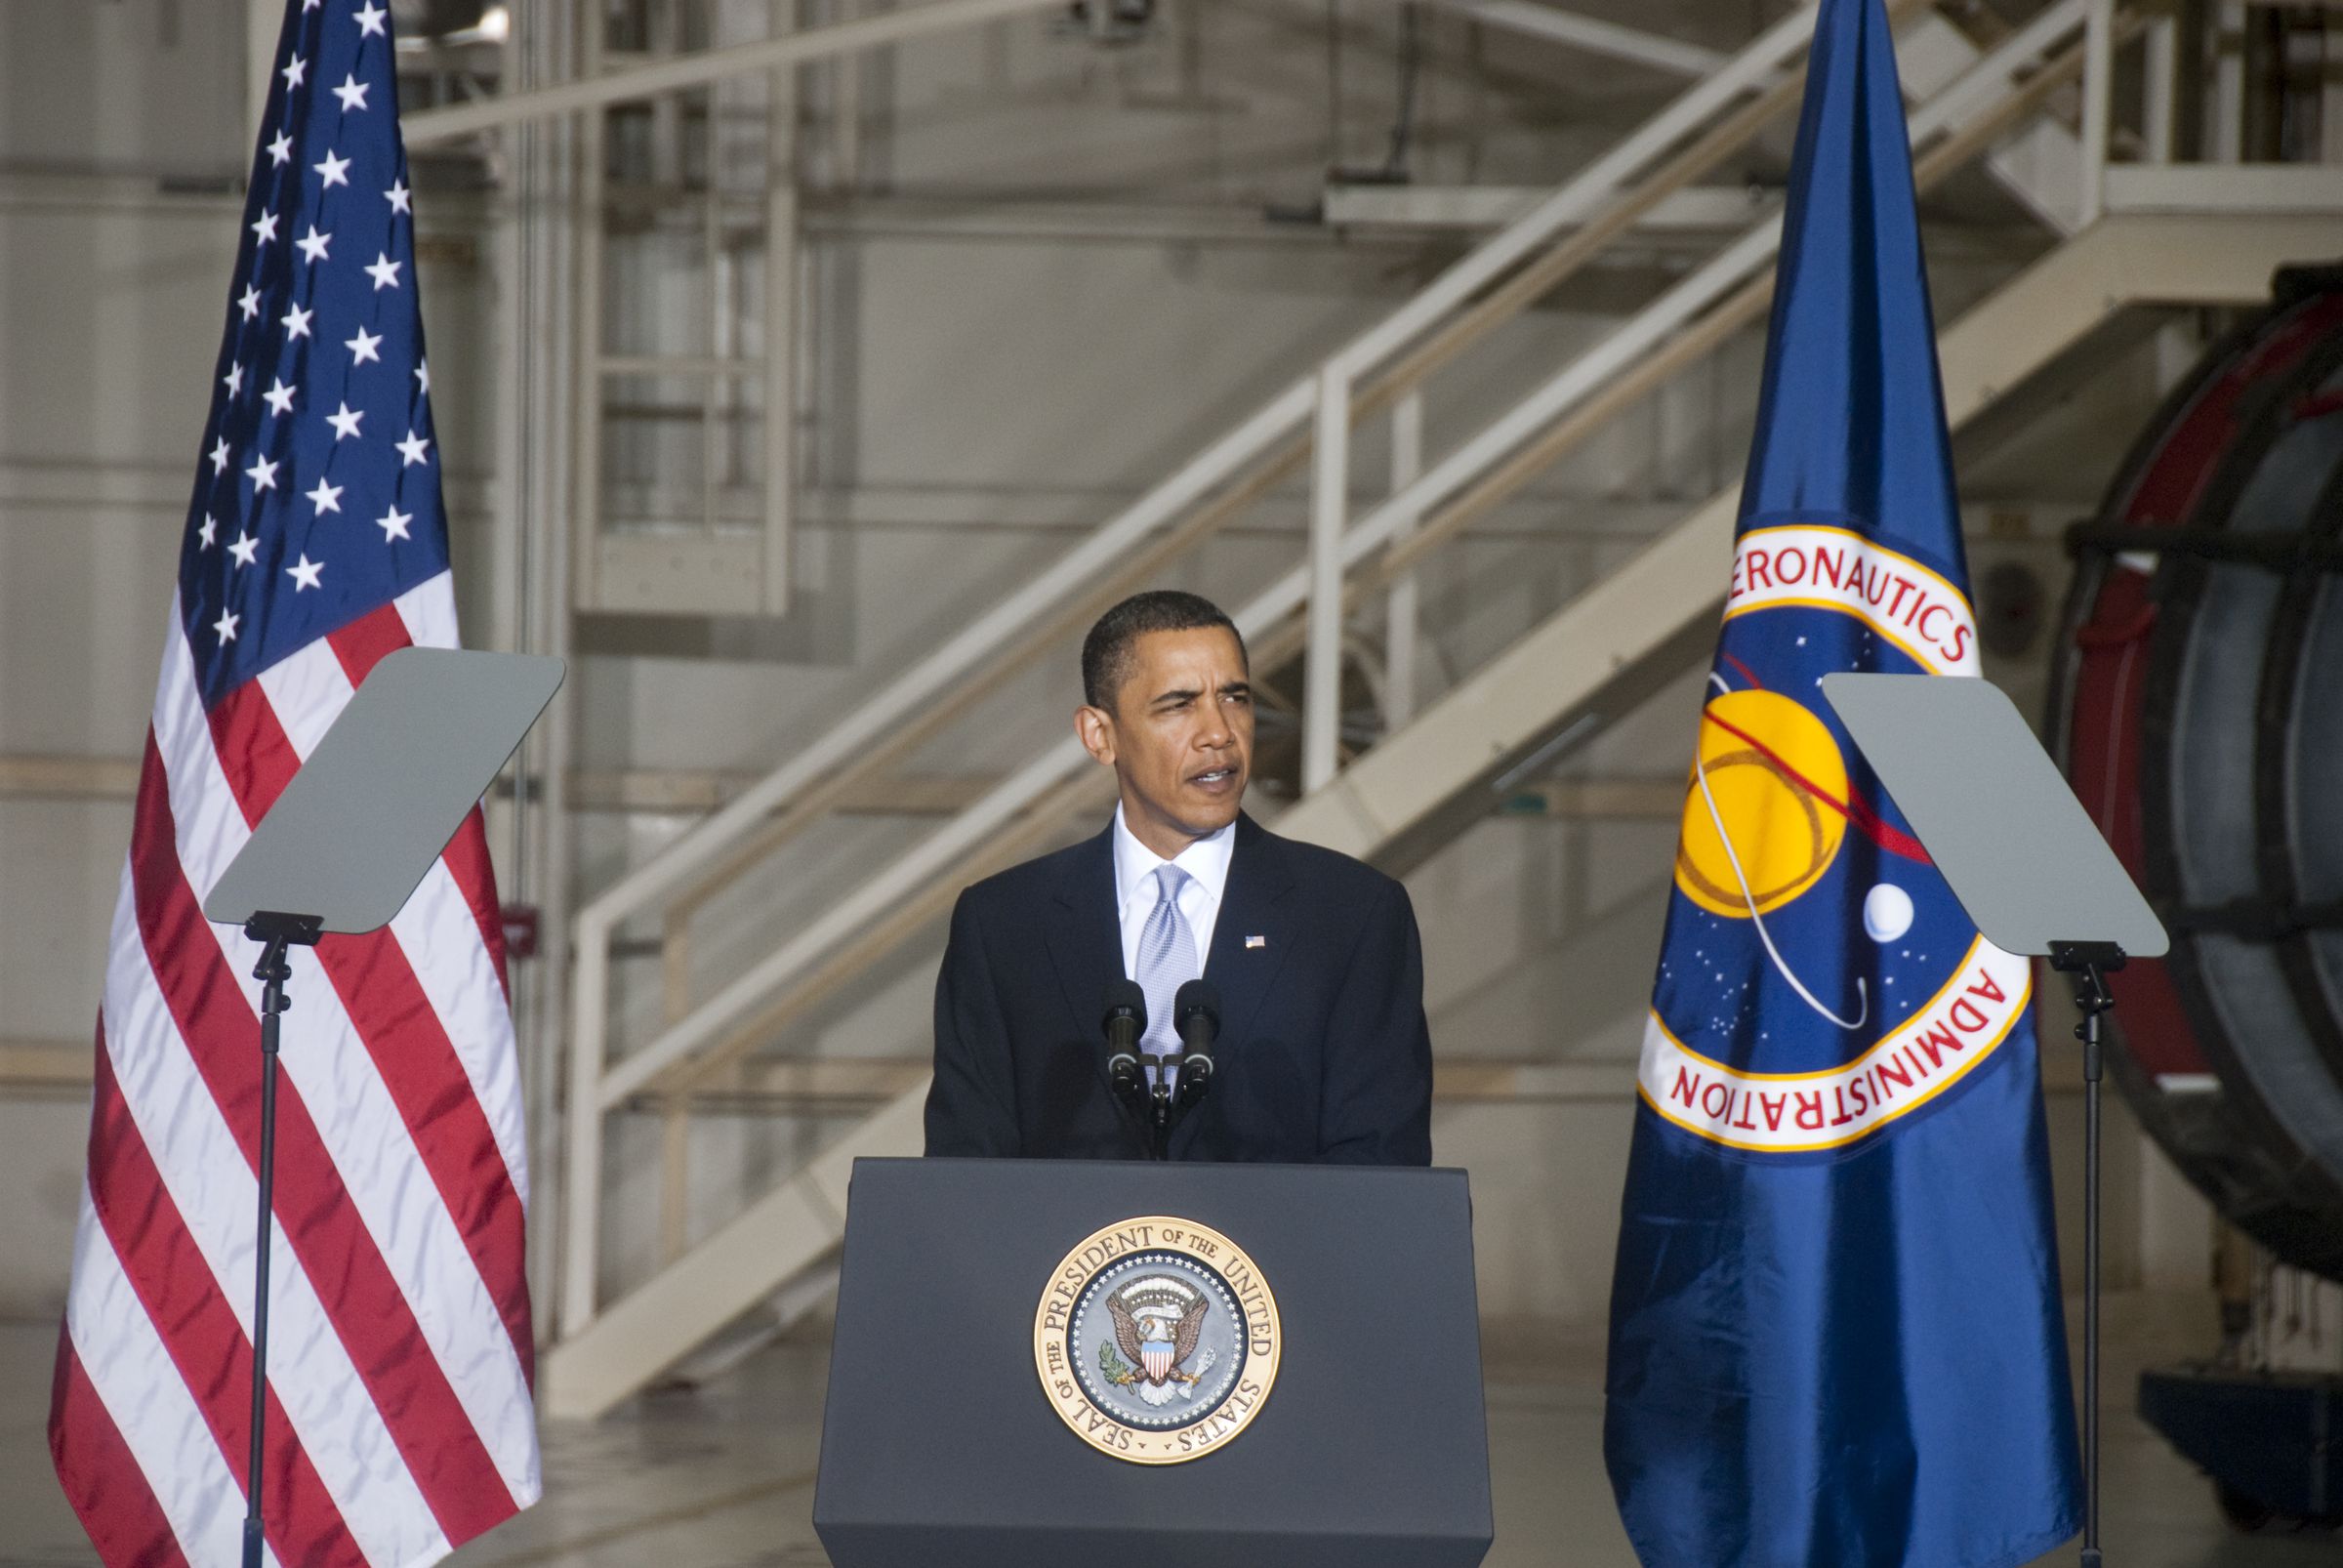 Obama makes a speech in 2010 at NASA’s Kennedy Space Center, outlining his goals for the space agency.